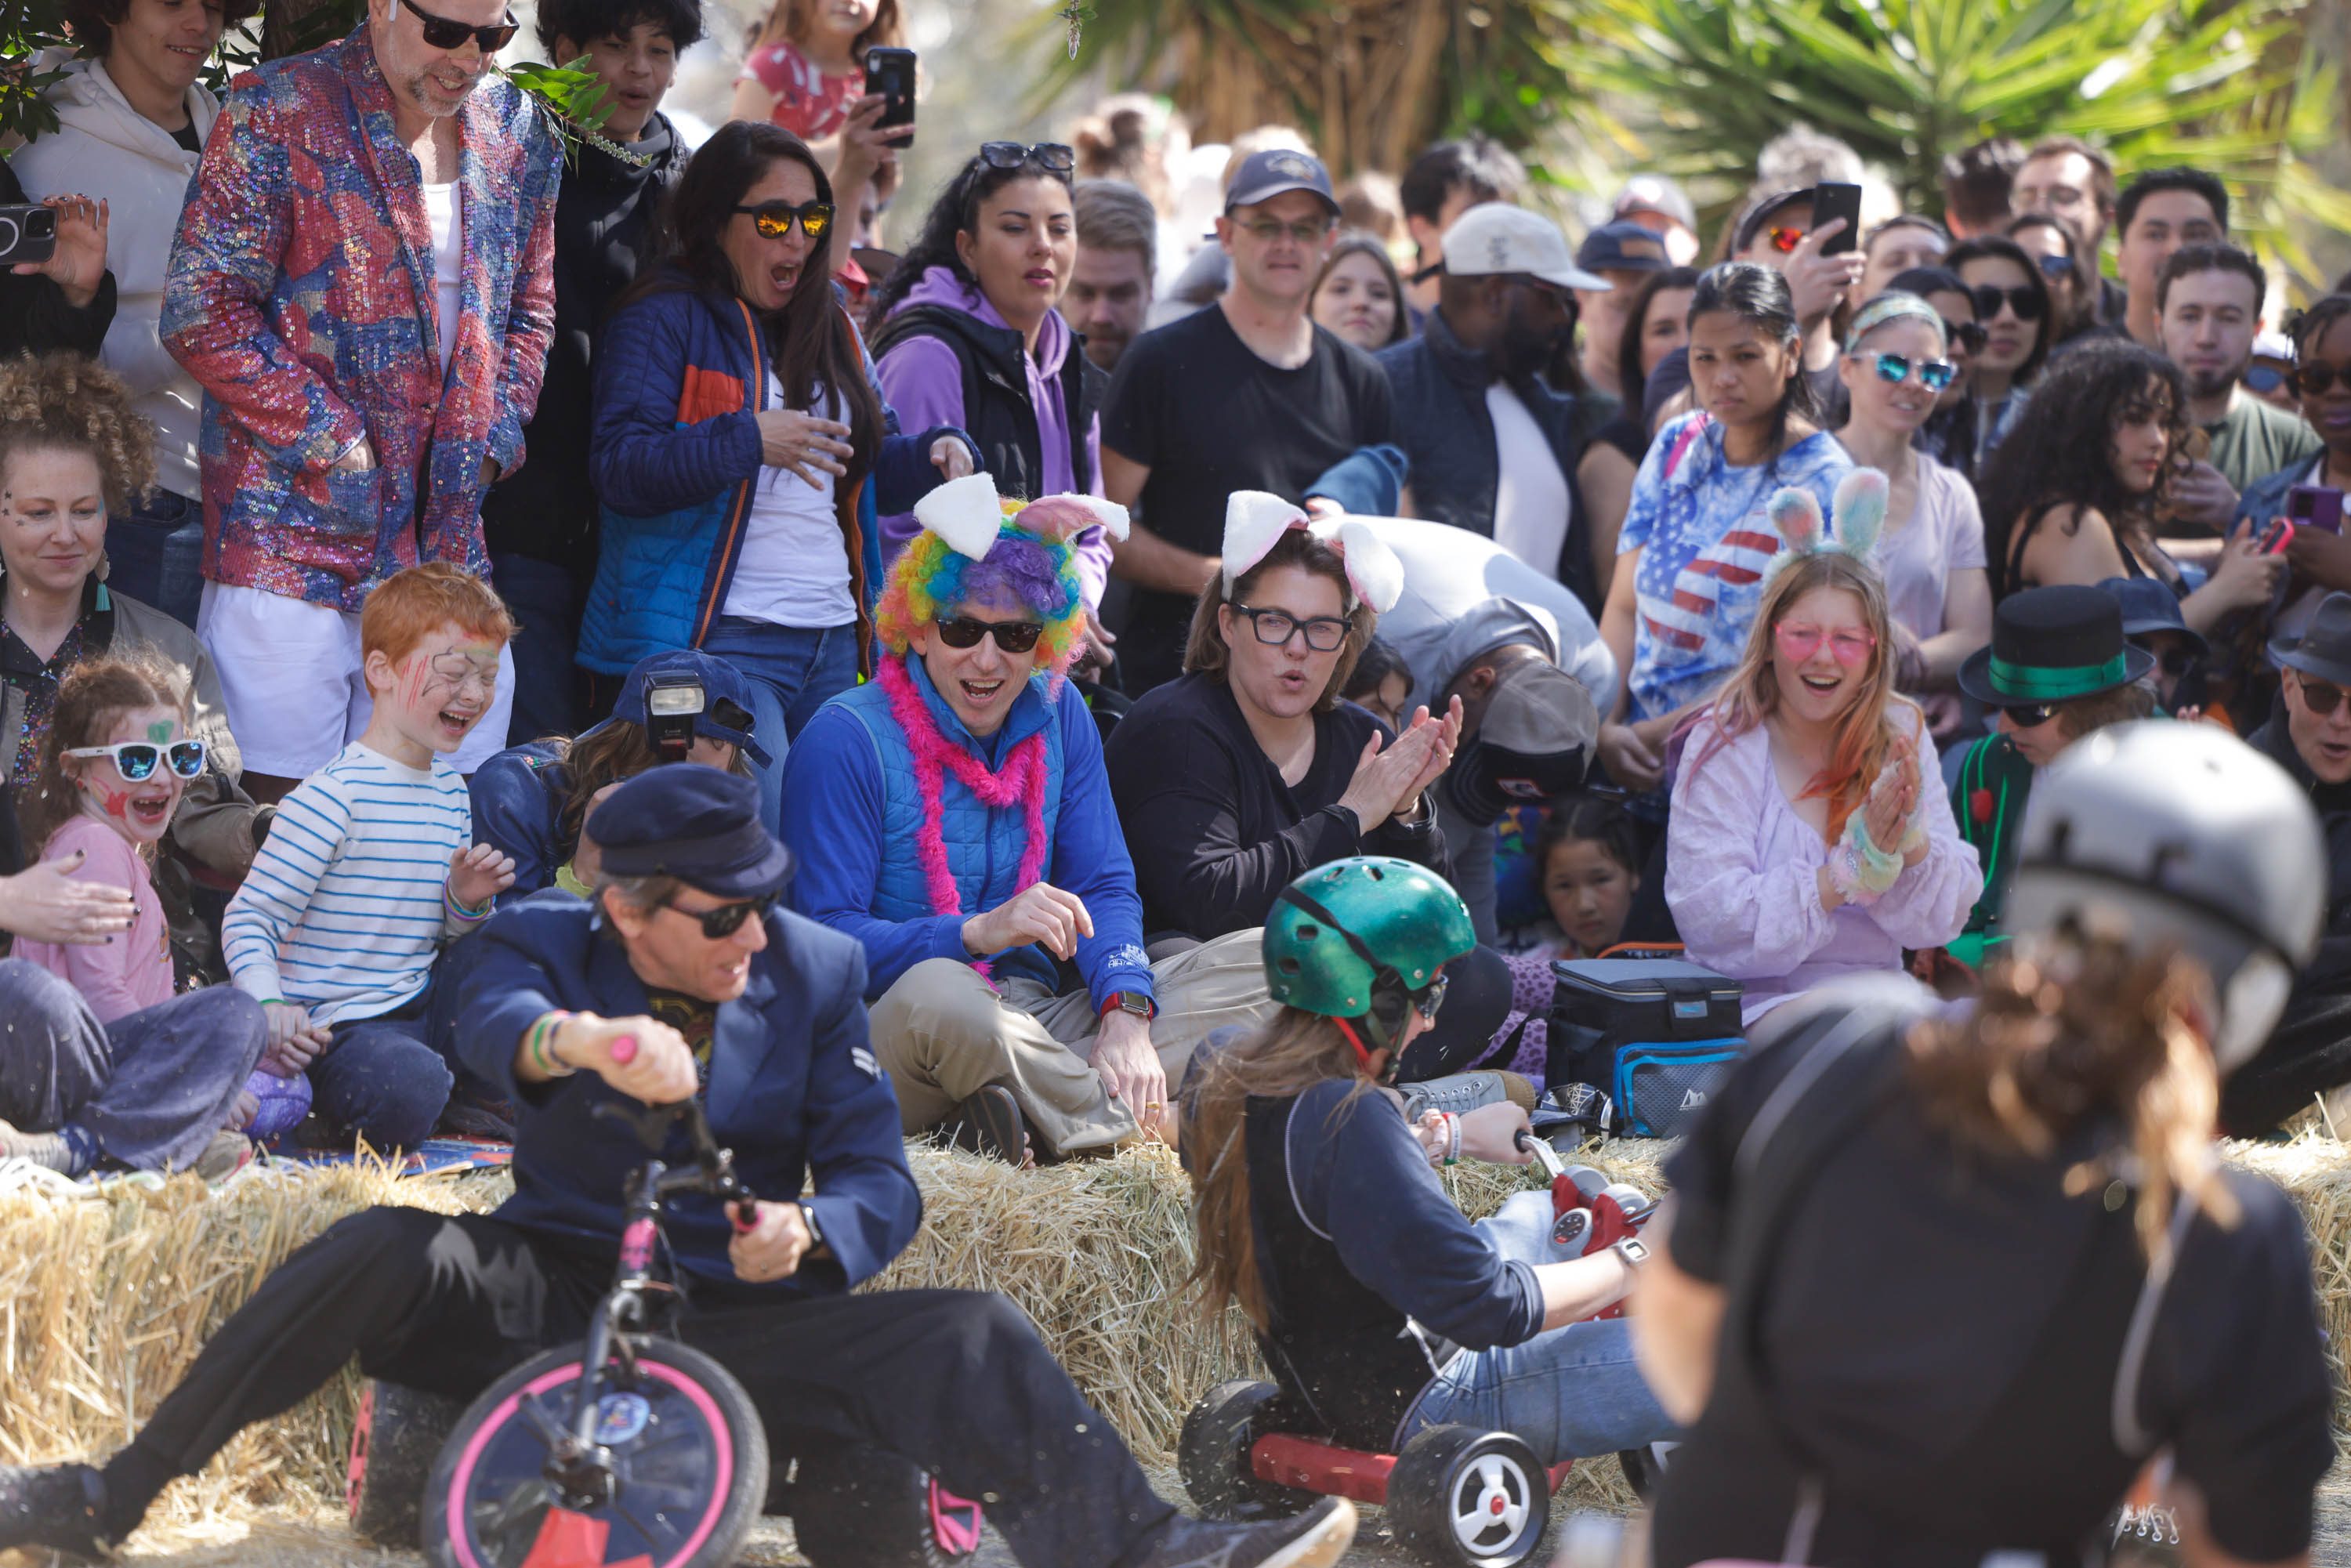 A crowd watches people on tiny bikes; some wear colorful, quirky outfits and helmets.